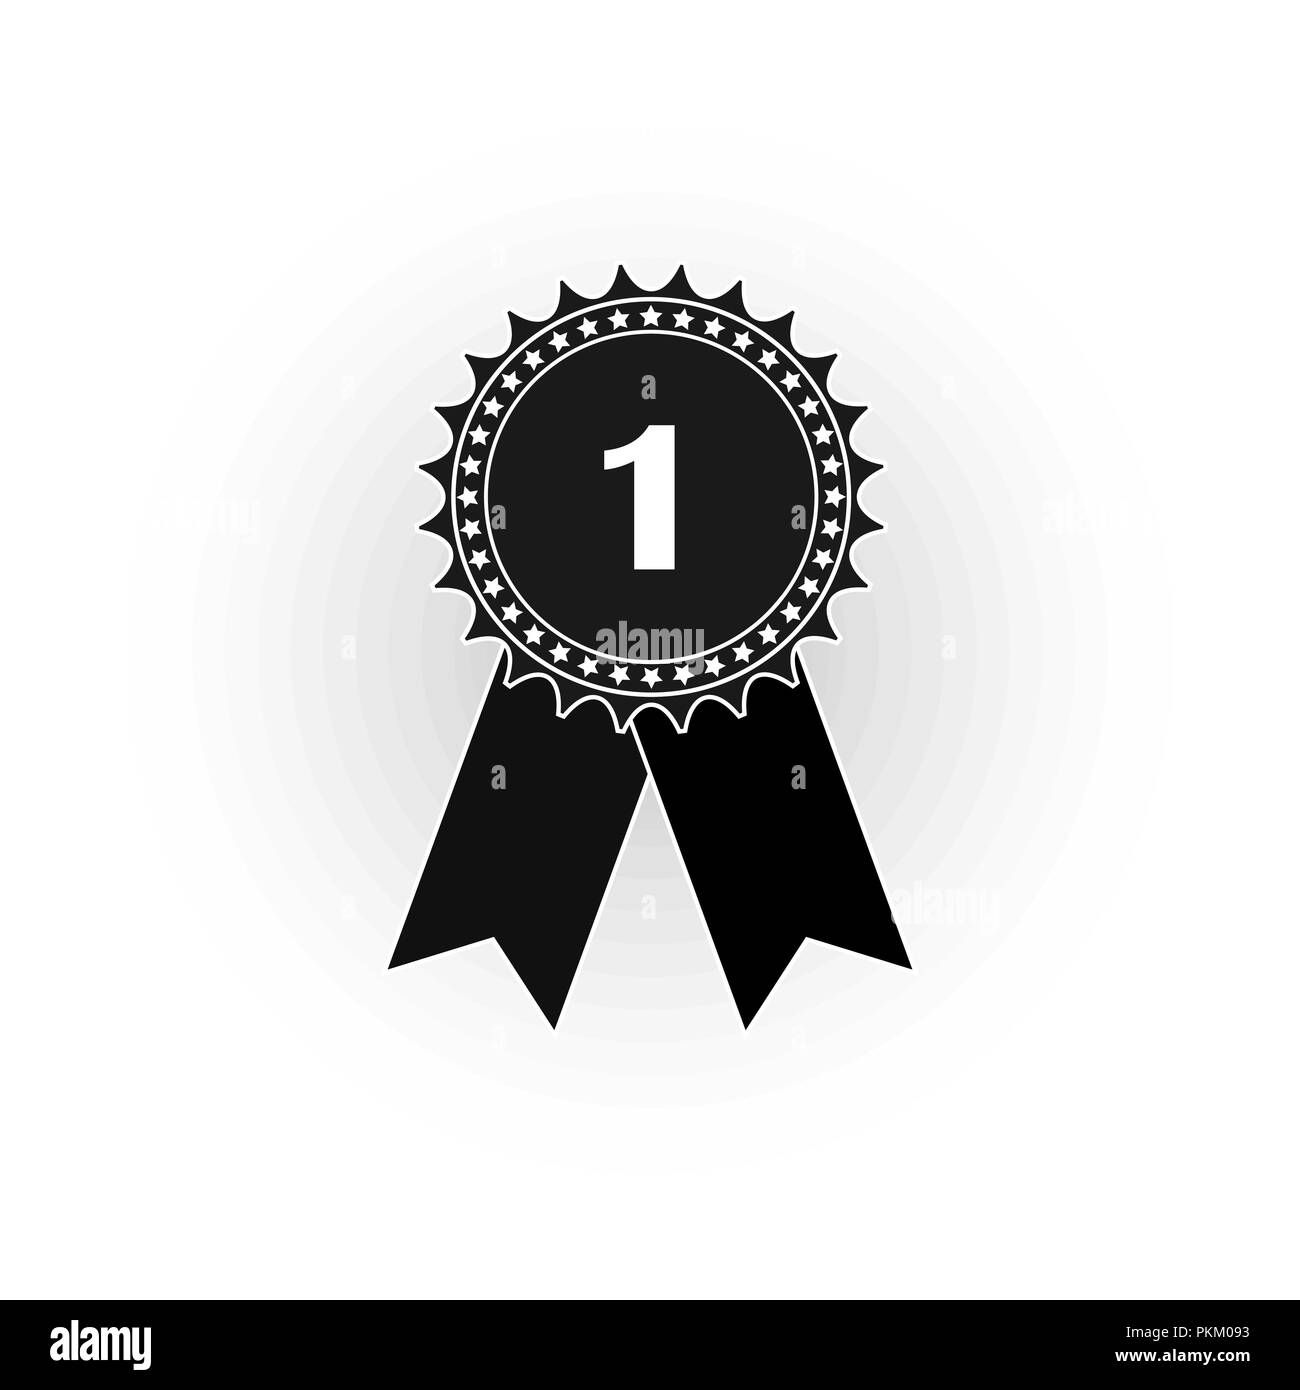 Medal icon with number one, flat black and white image Stock Vector